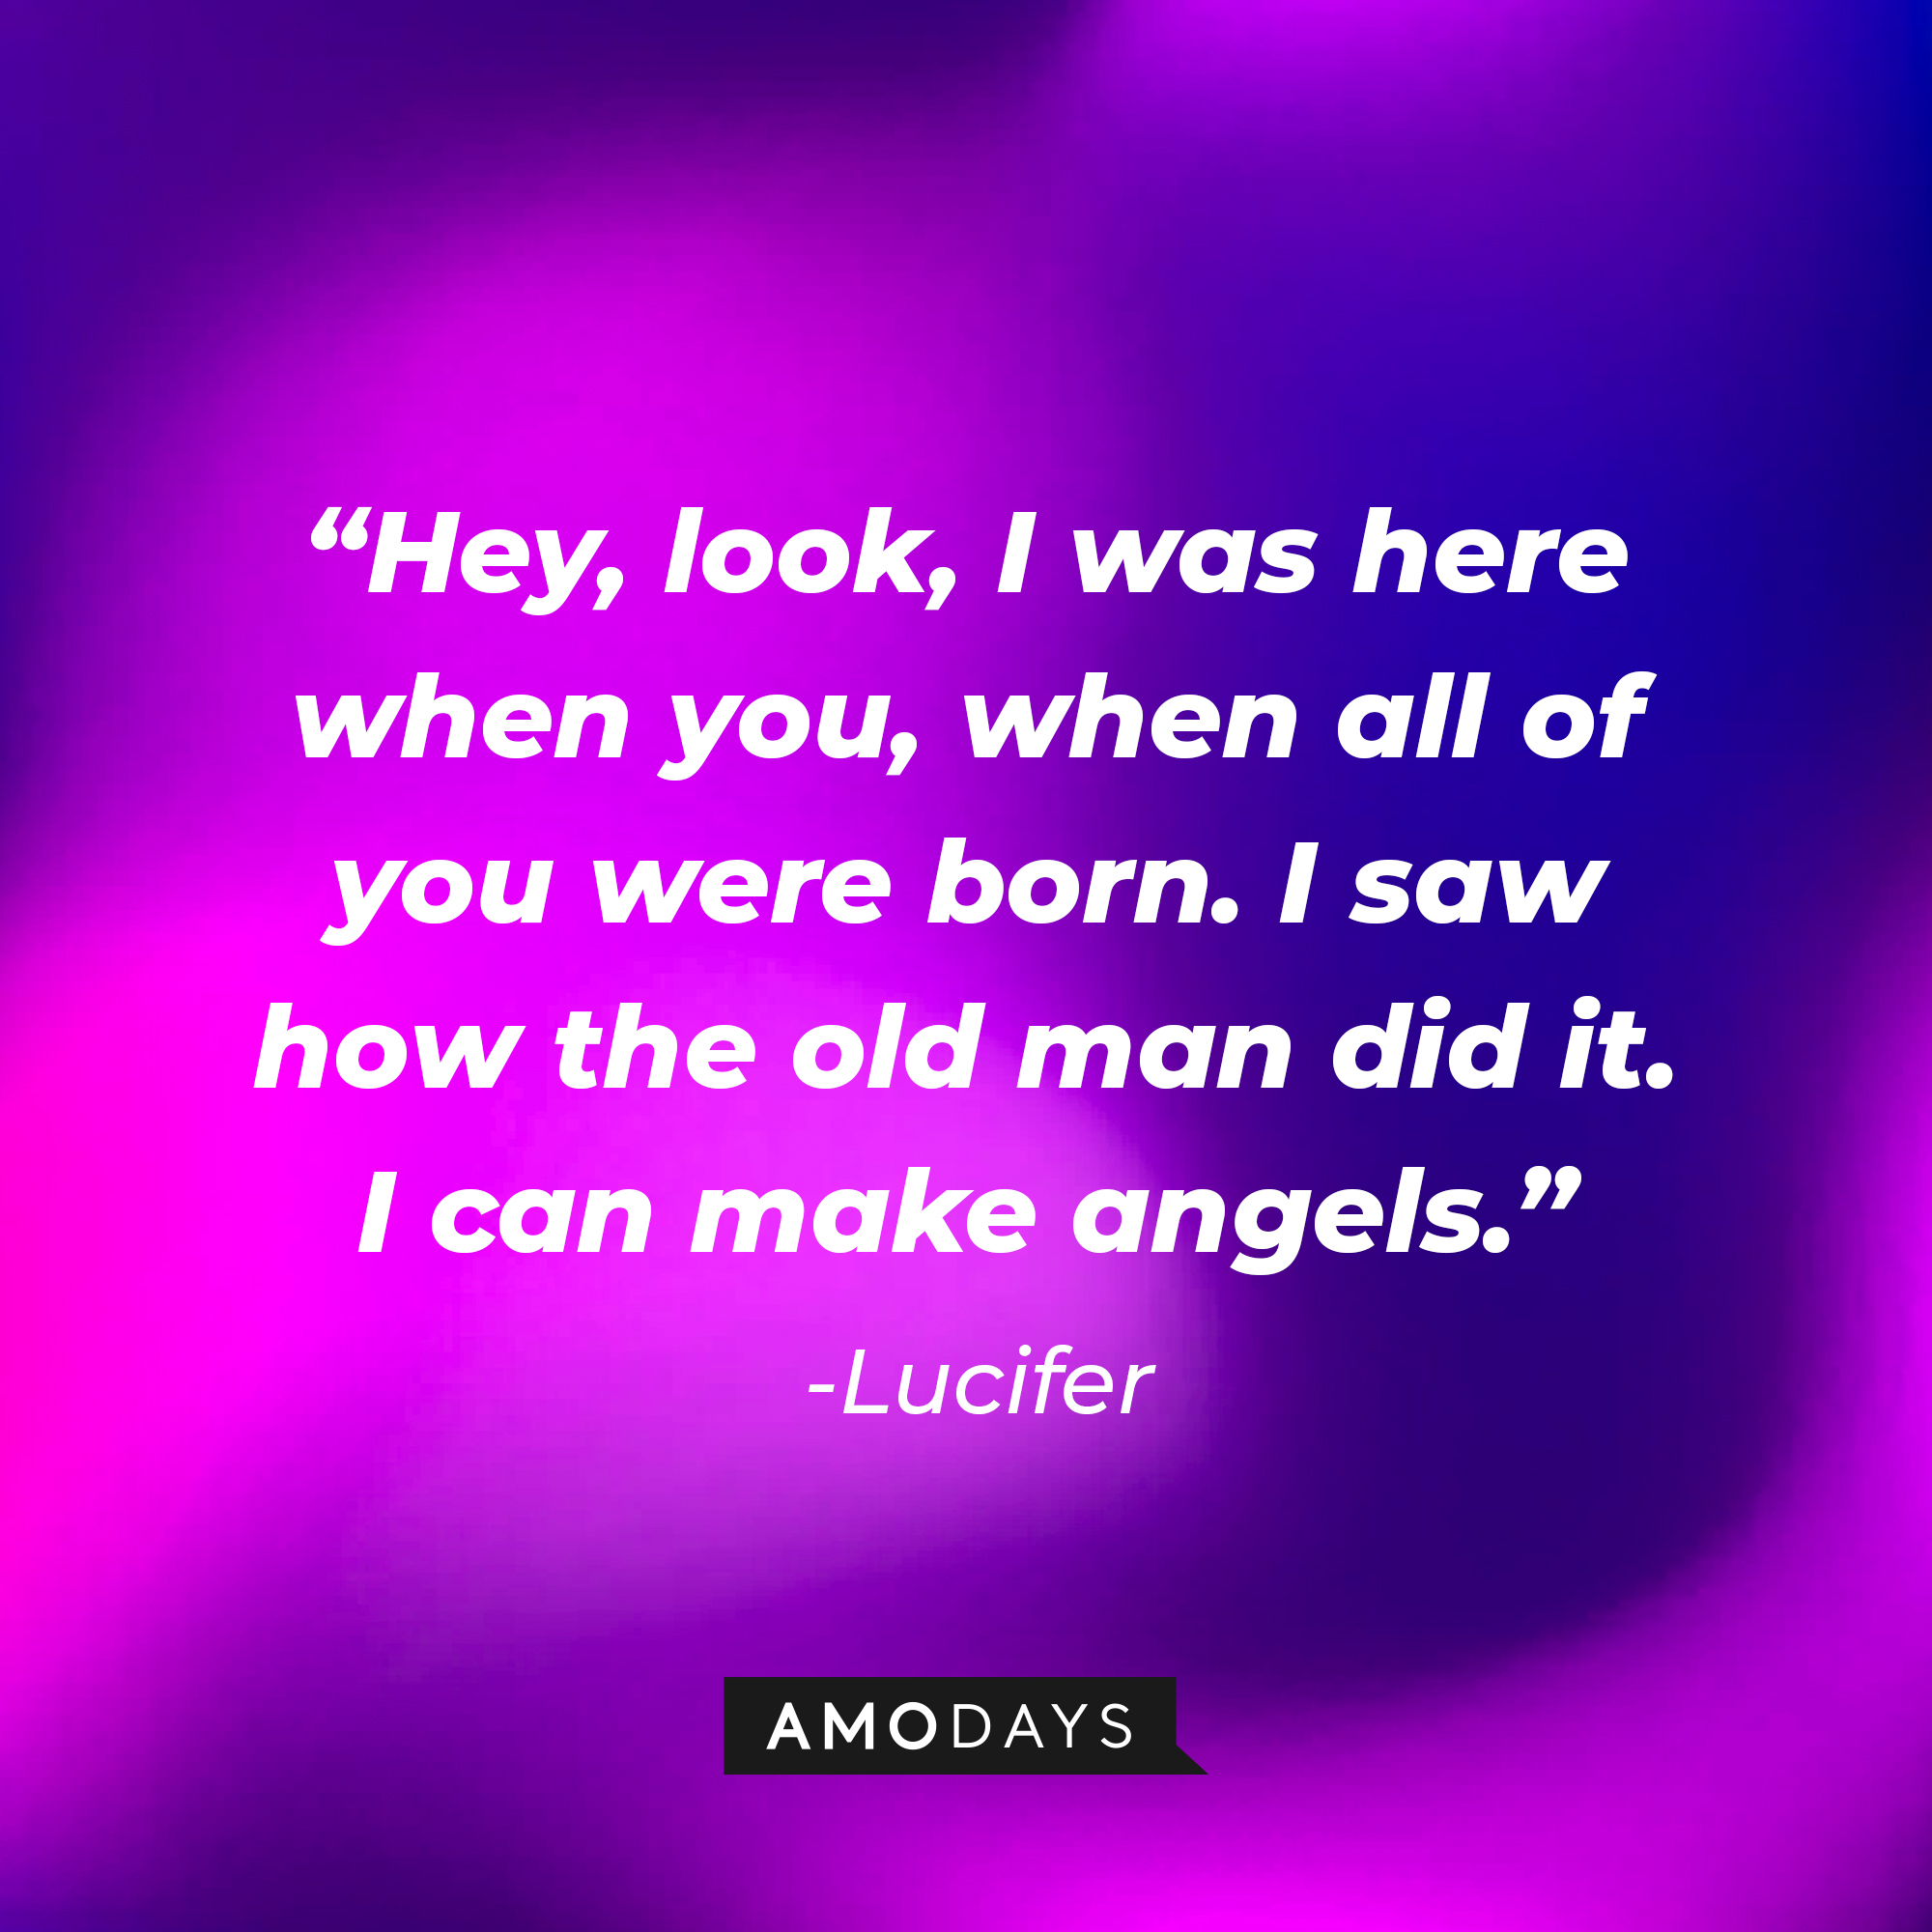 Lucifer’s quote: “Hey, look, I was here when you, when all of you were born. I saw how the old man did it. I can make angels. | Source: AmoDays